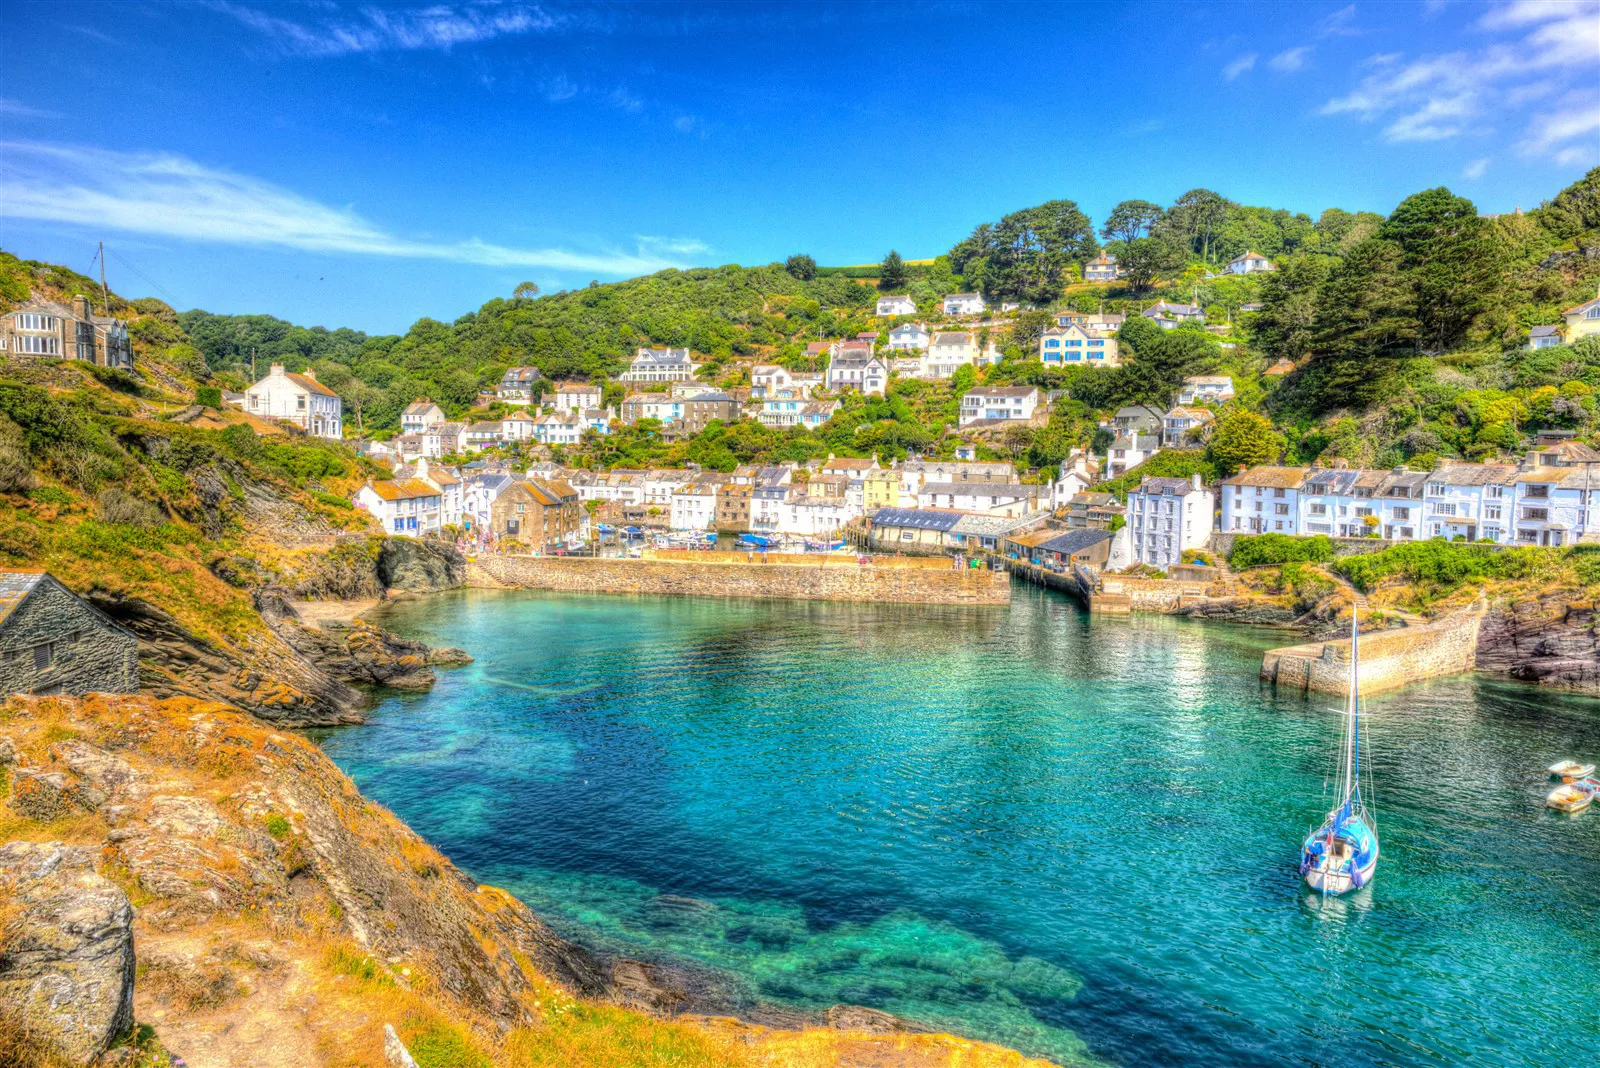 5 good reasons to check out Polperro Festival